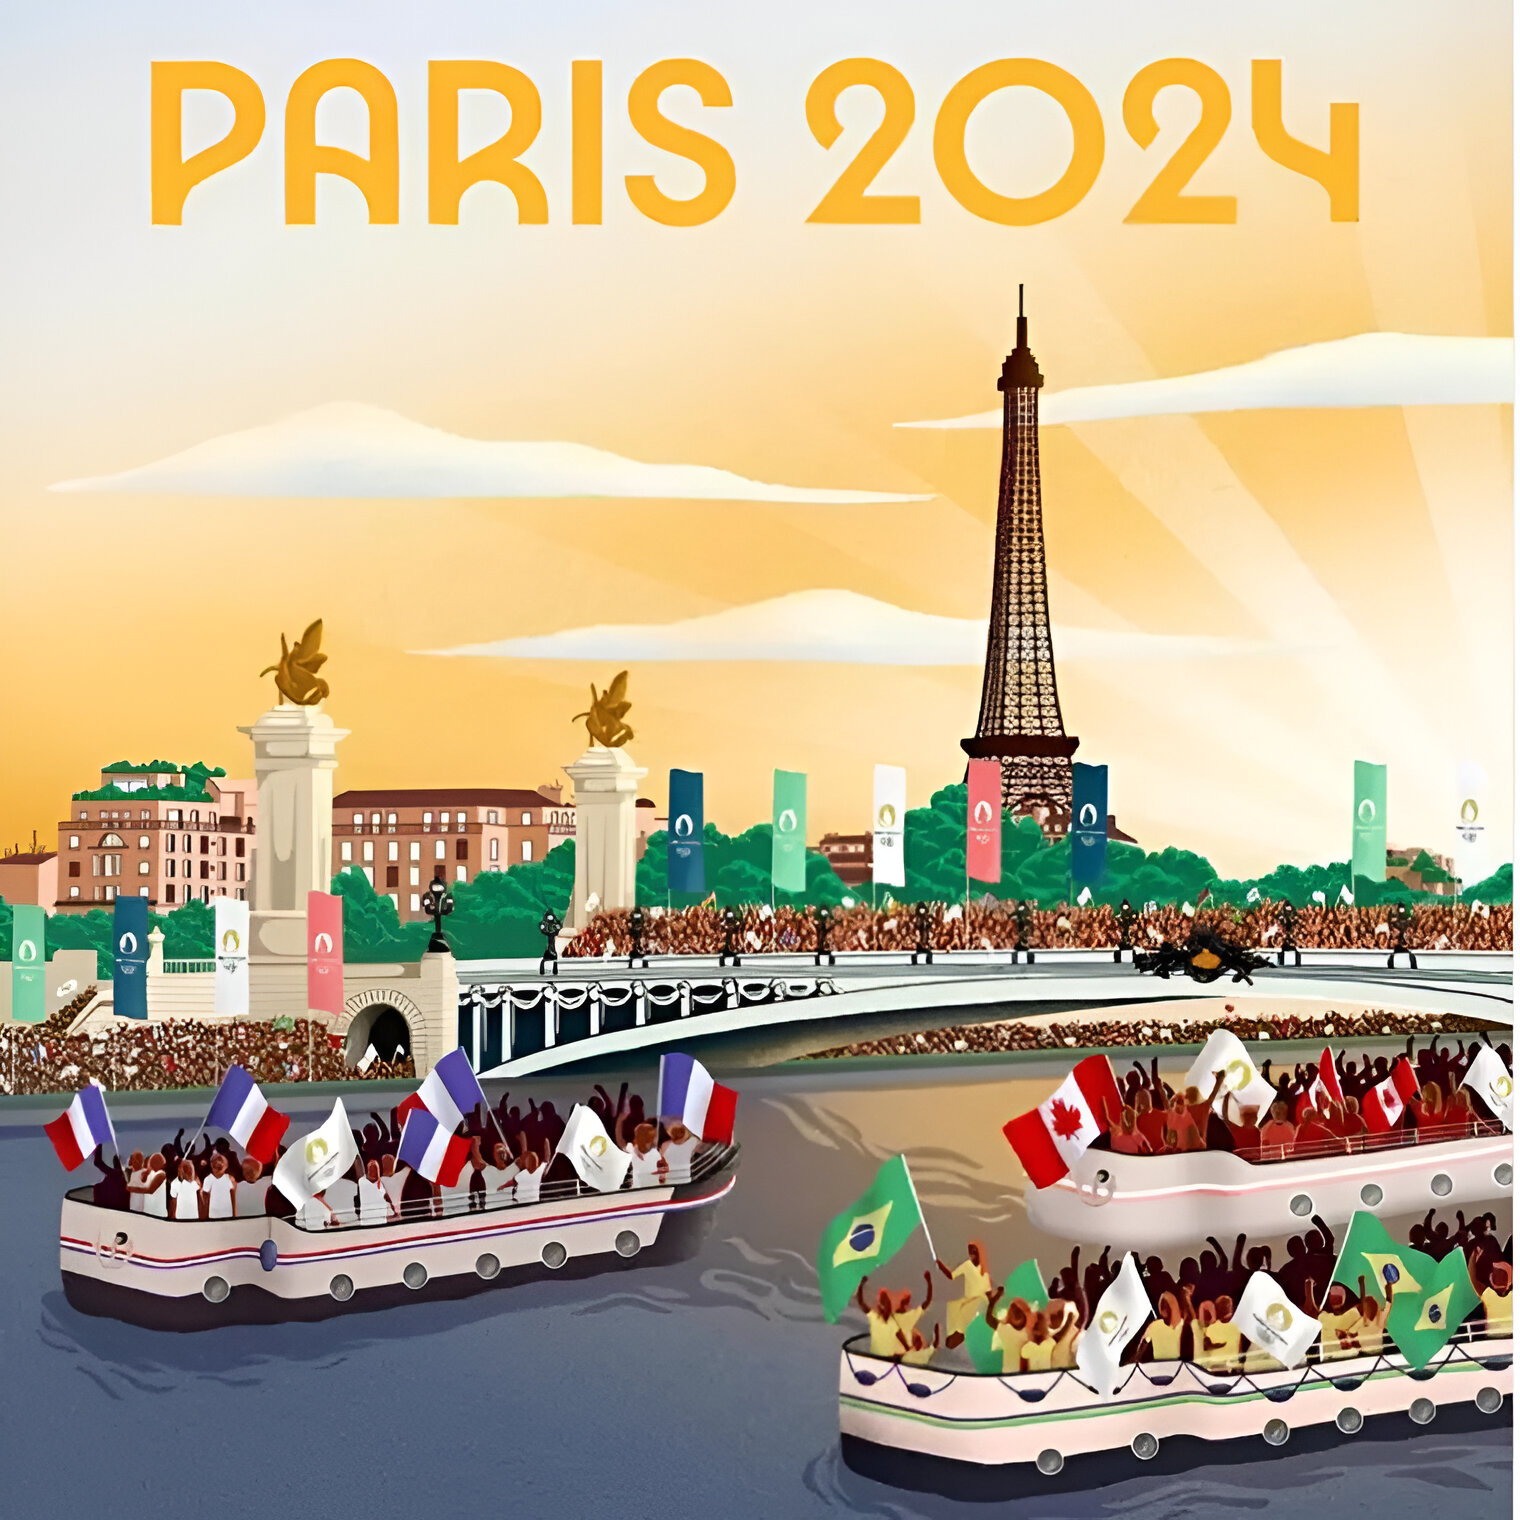 On track for the Paris 2024 Olympic Games